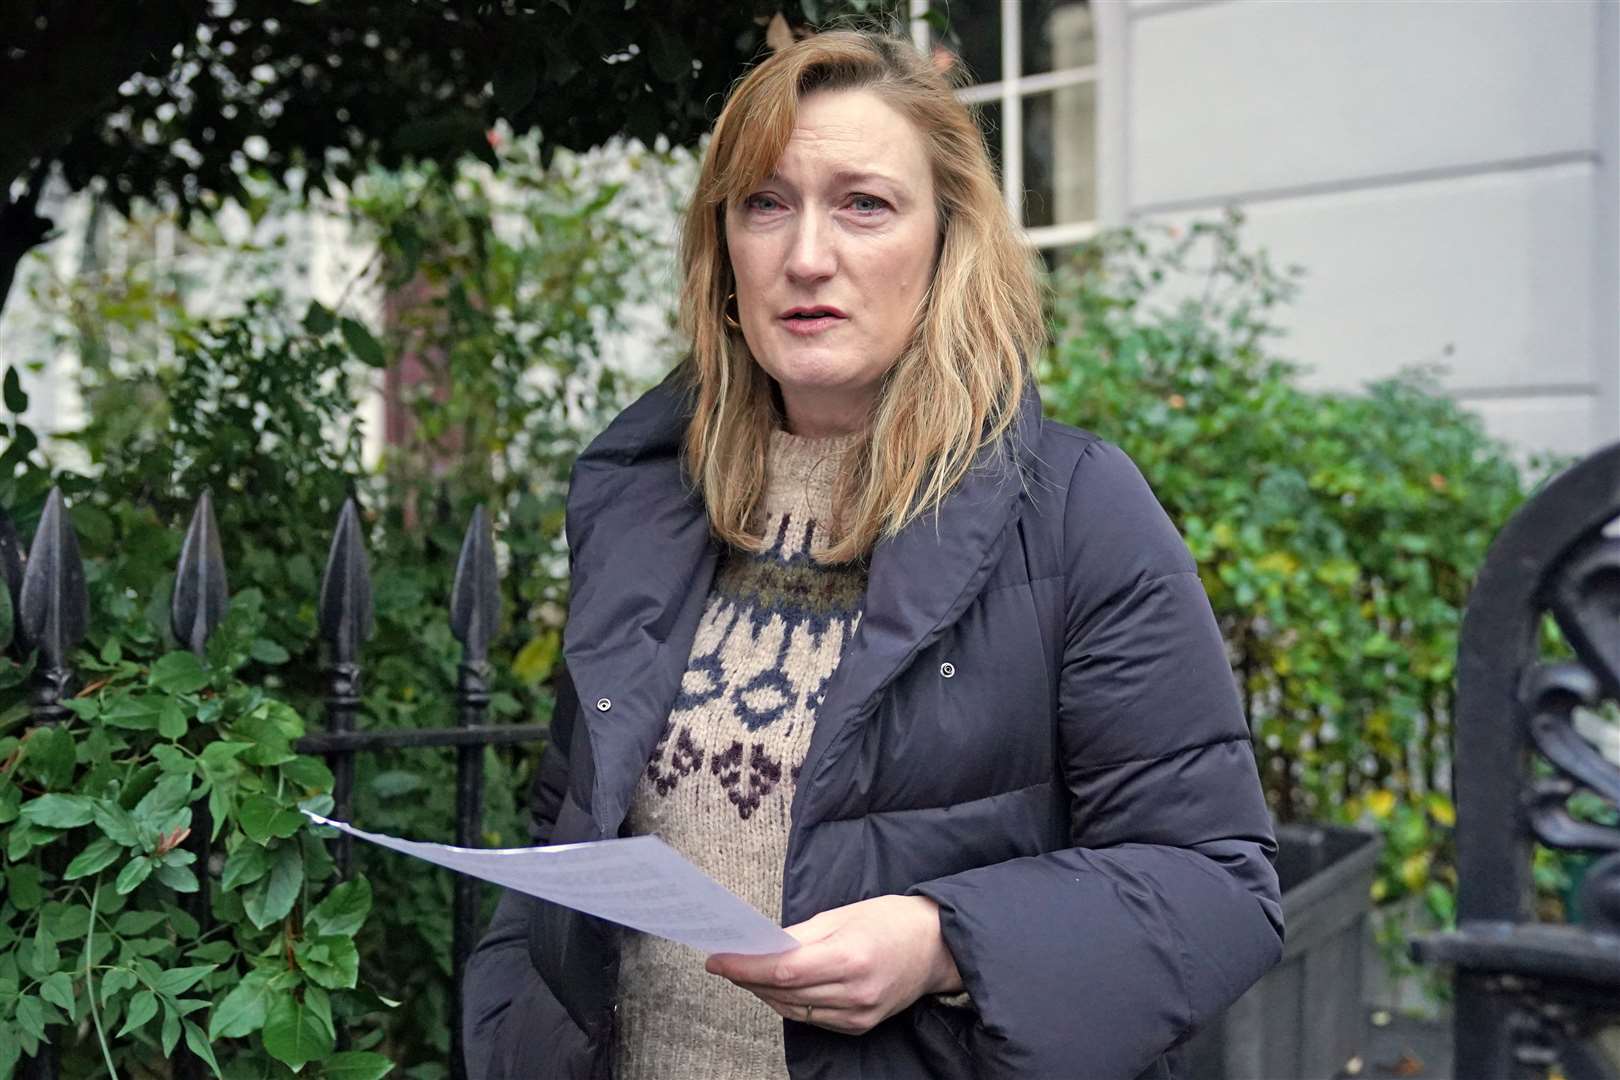 Former PM spokeswoman Allegra Stratton resigned after a video emerged of her joking about a Downing Street party (Jonathan Brady/PA)